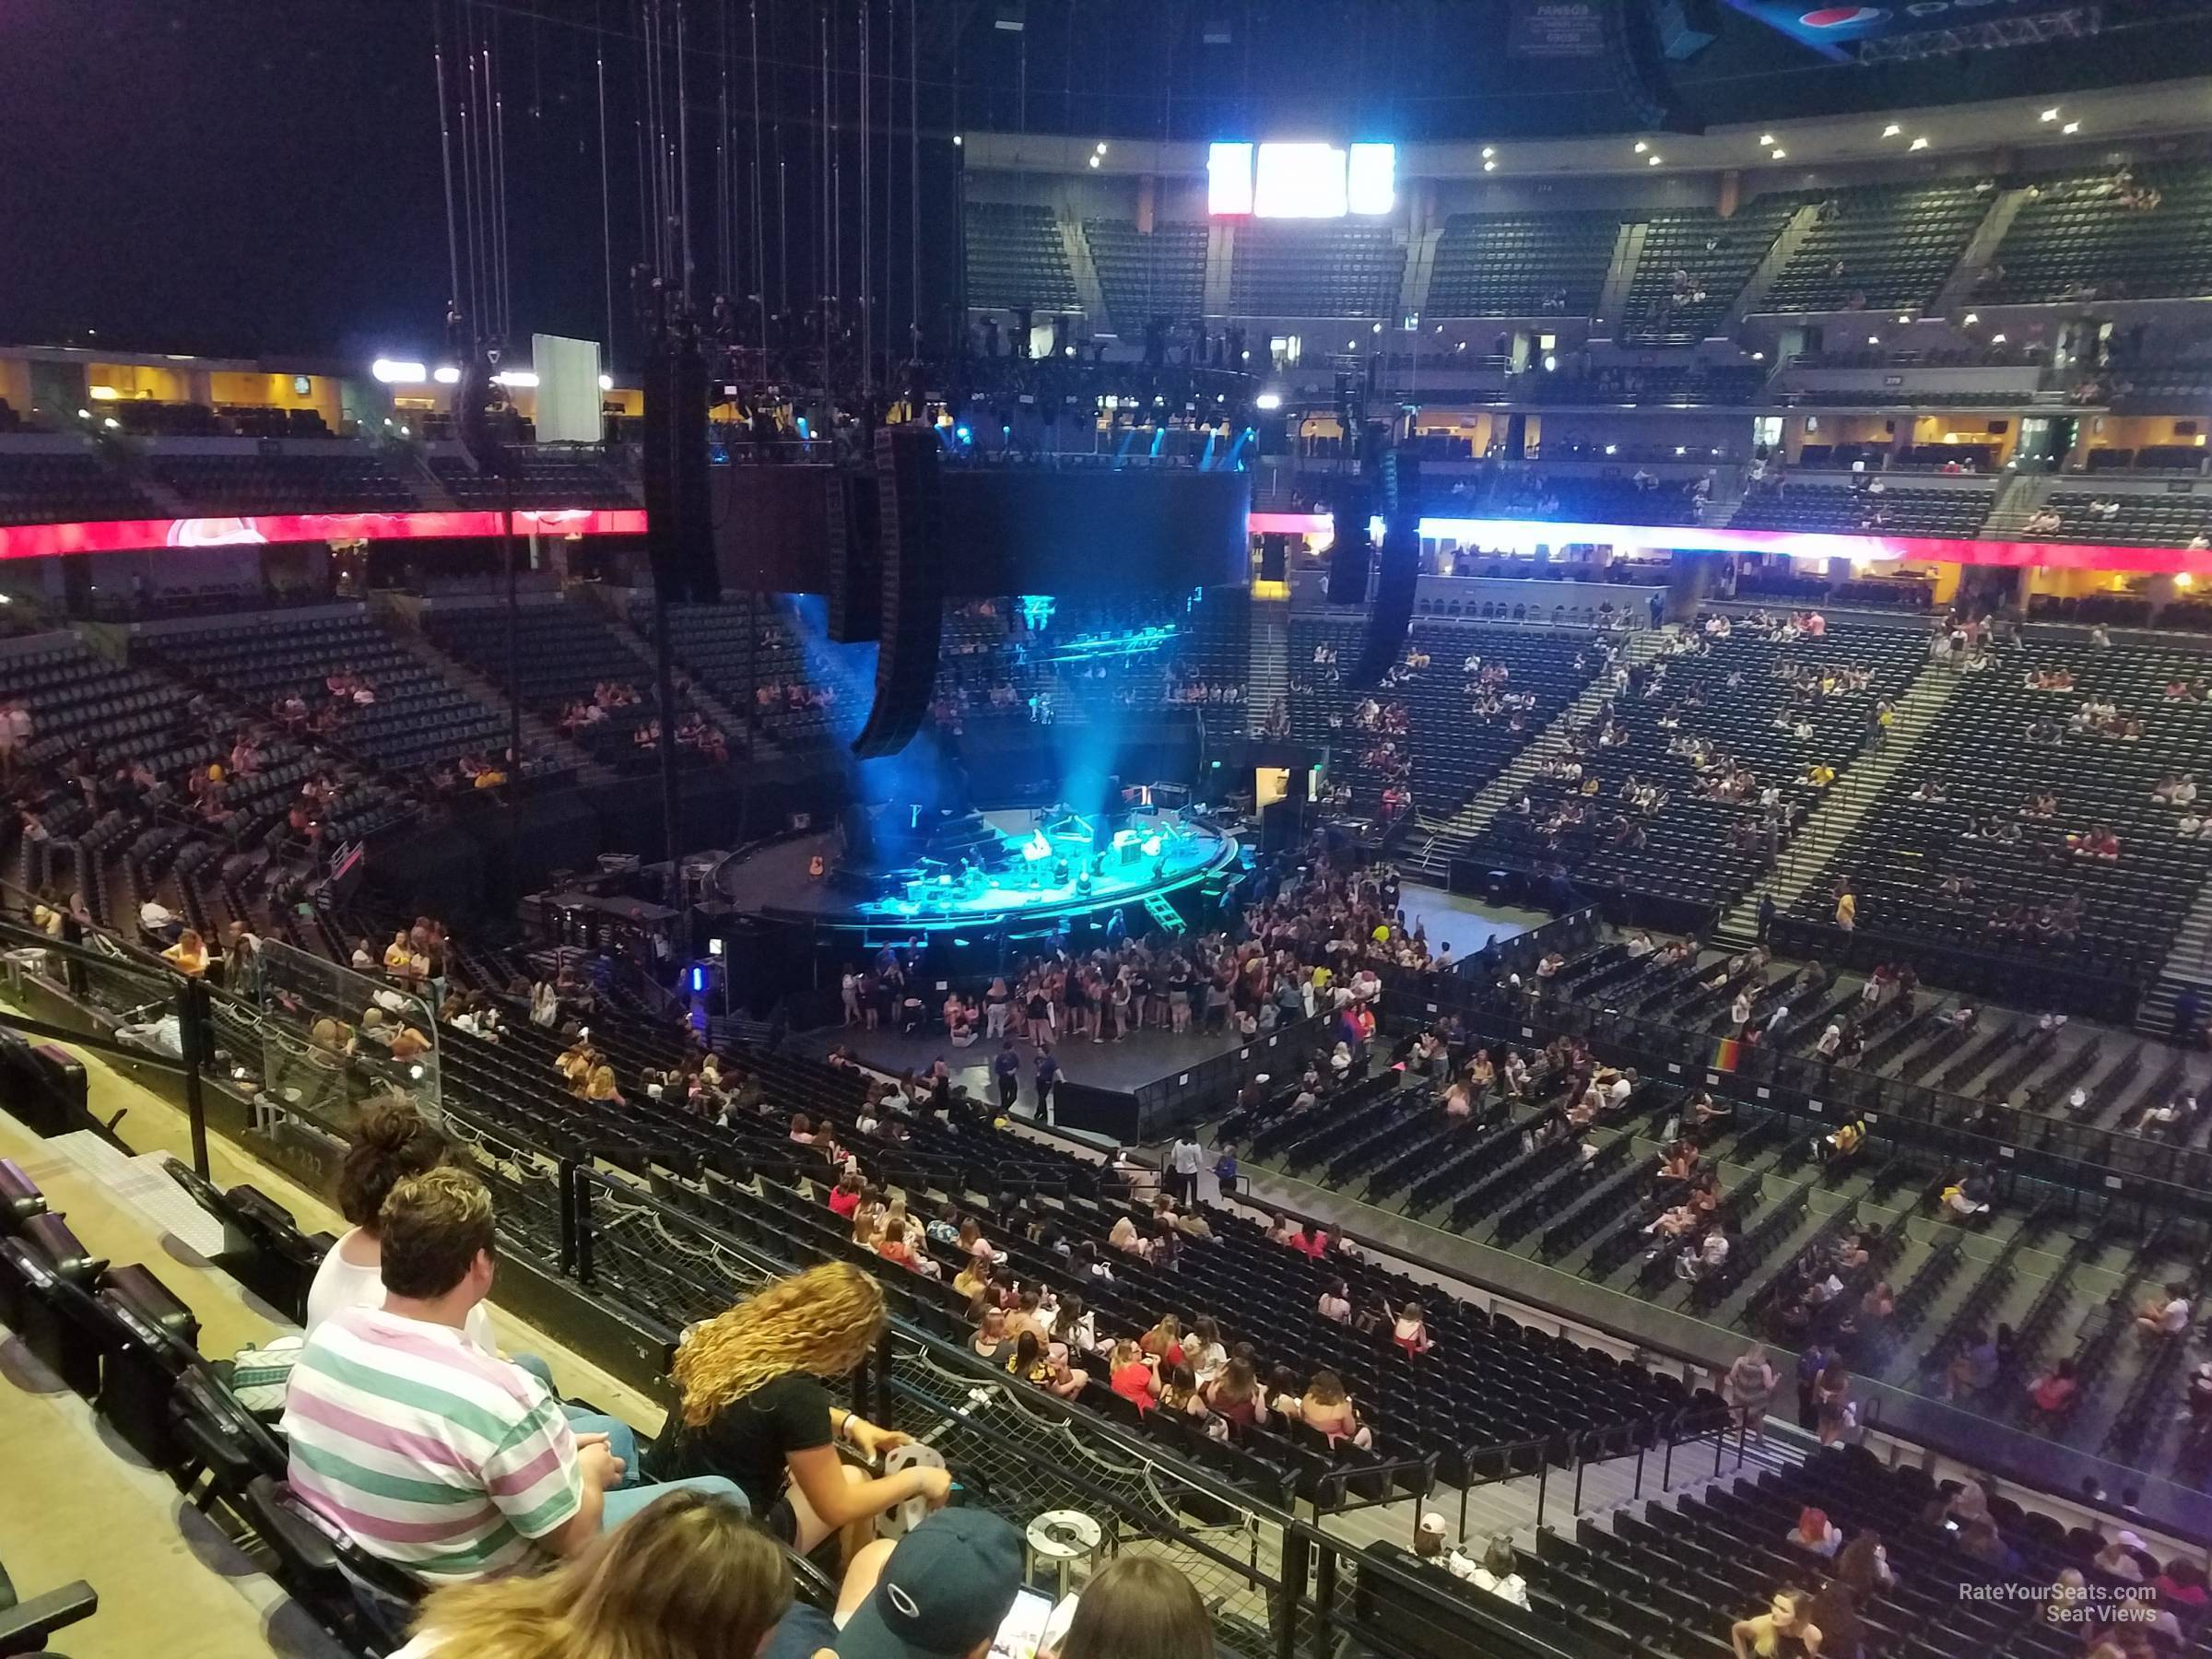 section 230, row 4 seat view  for concert - ball arena